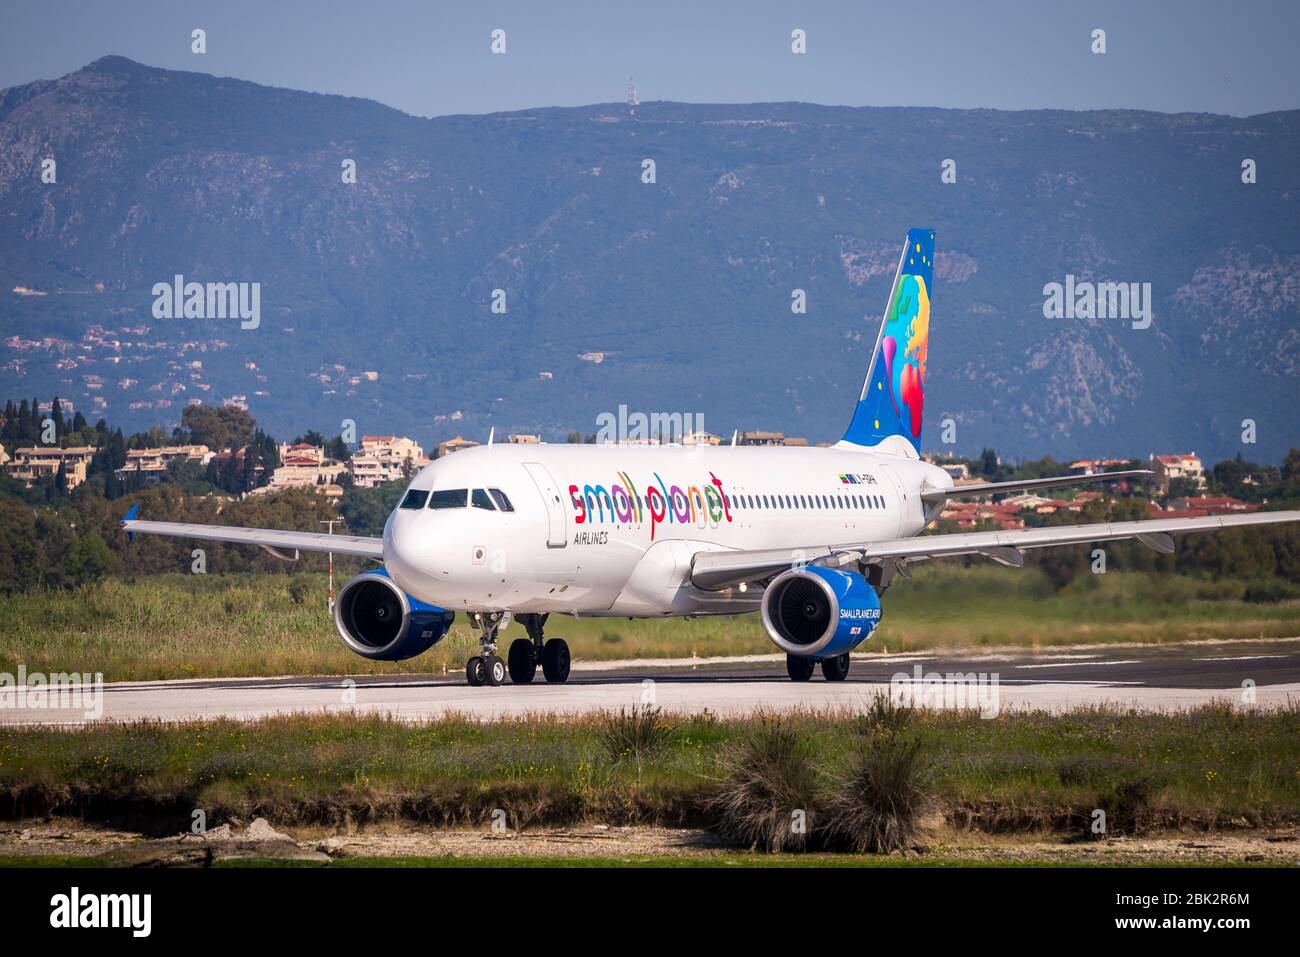 Small Planet Airlines Airbus A320 aeroplane taxiing on the runway at Corfu International Airport. Stock Photo